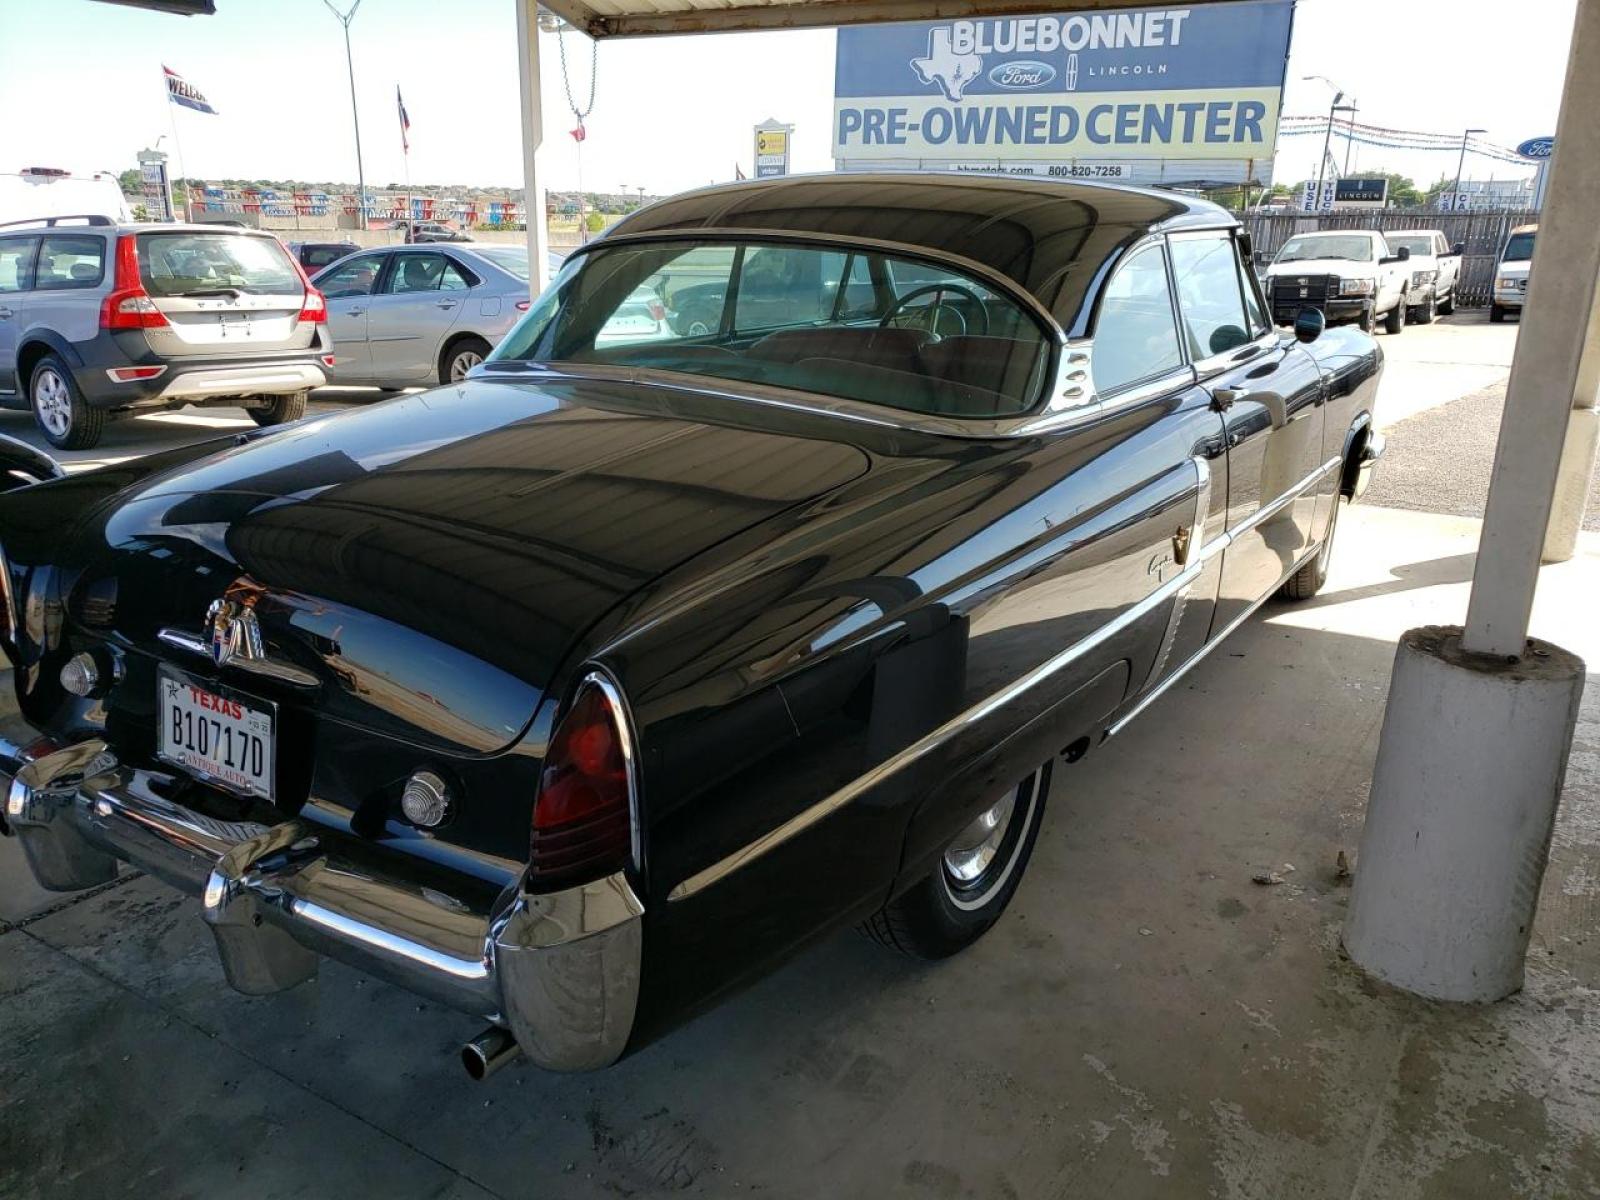 1953 Black /Red Lincoln Capri (53LA7562H) , Automatic transmission, located at 1687 Business 35 S, New Braunfels, TX, 78130, (830) 625-7159, 29.655487, -98.051491 - Check this out! This 1953 Lincoln Capri is ready for it's new home. Over $60,000.00 restoration with a rebuilt 351 M V8 engine. Power windows, power locks, and a South Texas car, so forget about the rust. The chrome bumpers aren't up to car show quality, but great for everyday driving. Under 10,000 - Photo #1